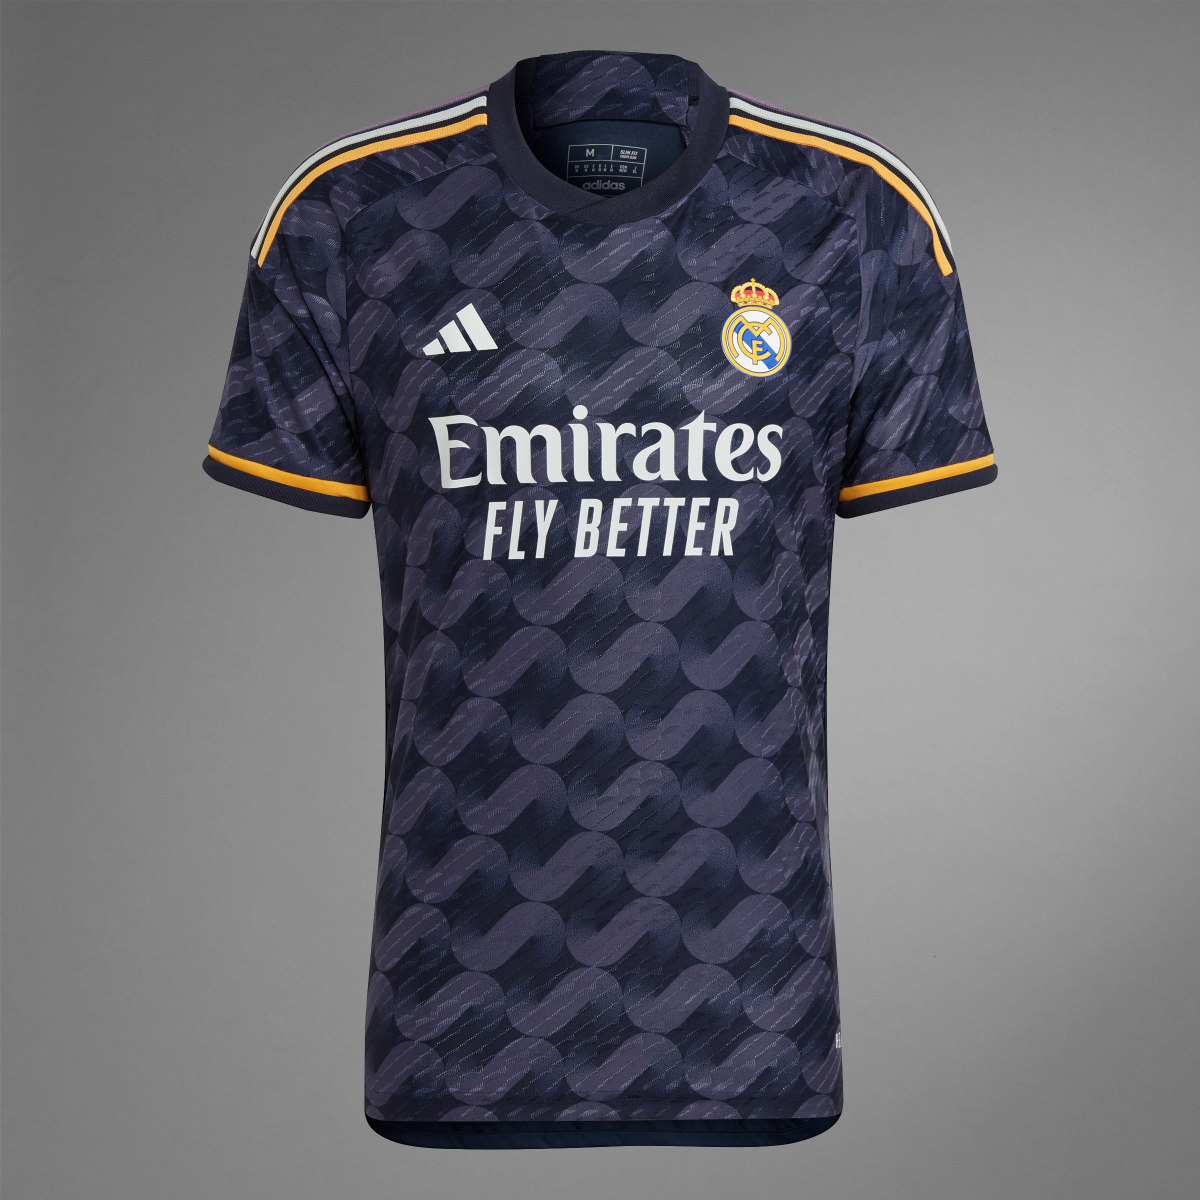 Adidas Maglia Away Authentic 23/24 Real Madrid. 10